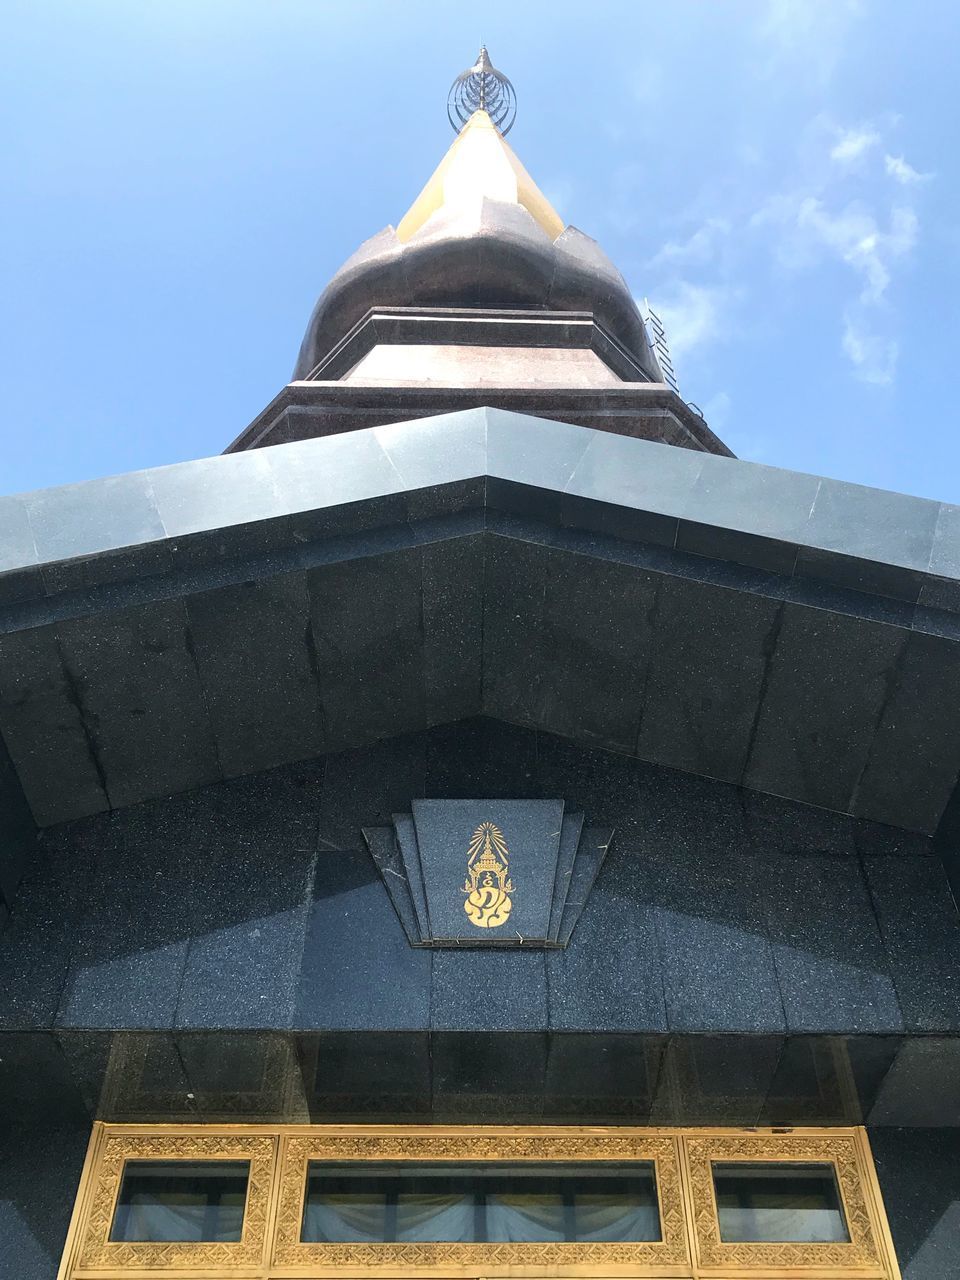 LOW ANGLE VIEW OF BELL TOWER AGAINST SKY